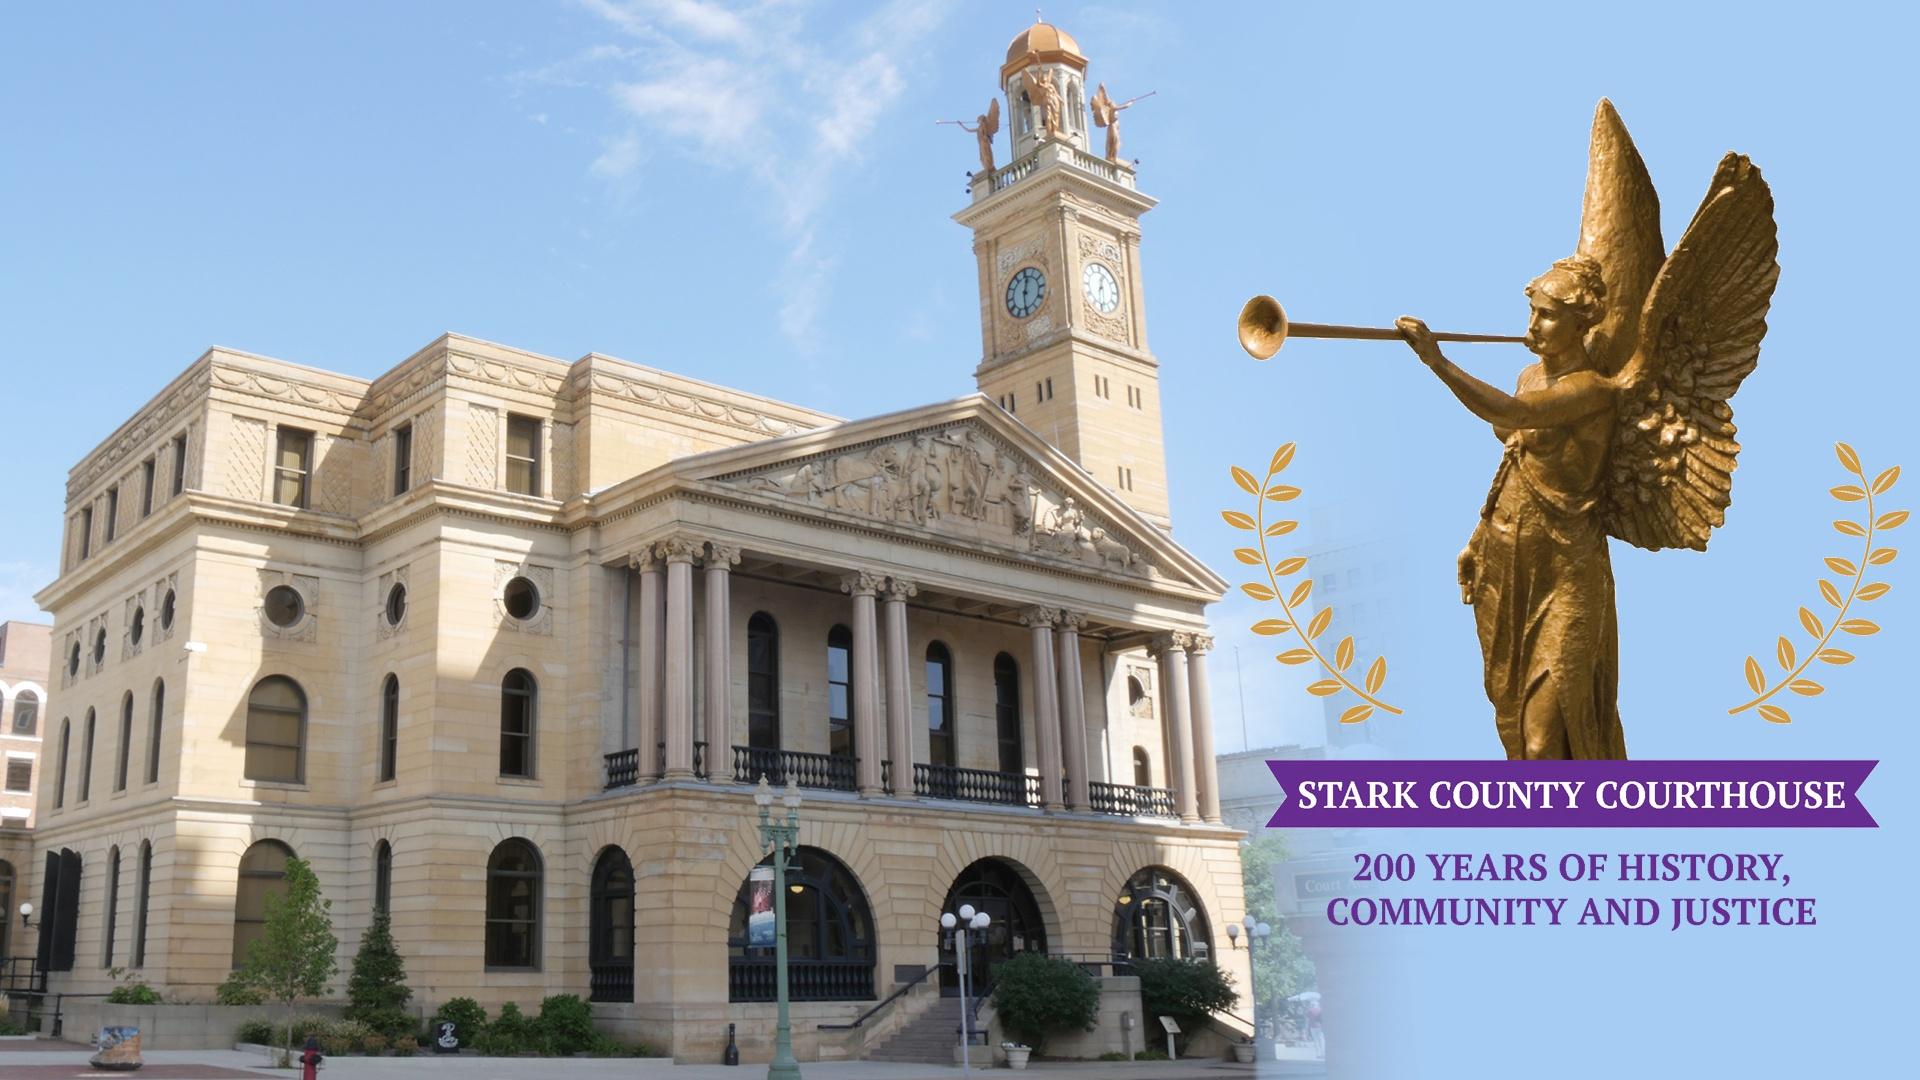 Stark County Courthouse: 200 Years of History, Community and Justice